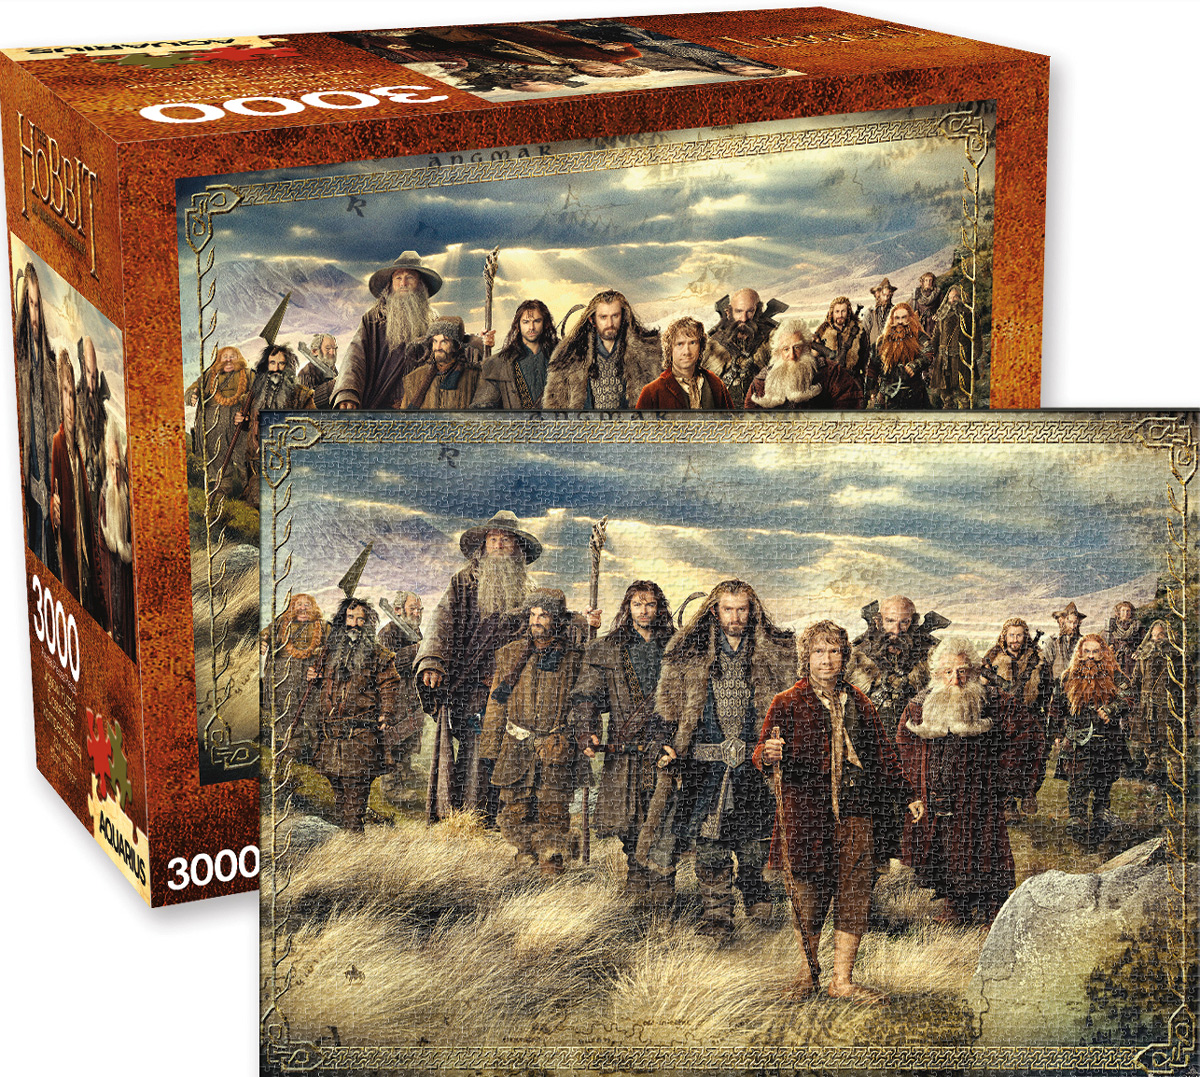 The Hobbit - Scratch and Dent Movies & TV Jigsaw Puzzle